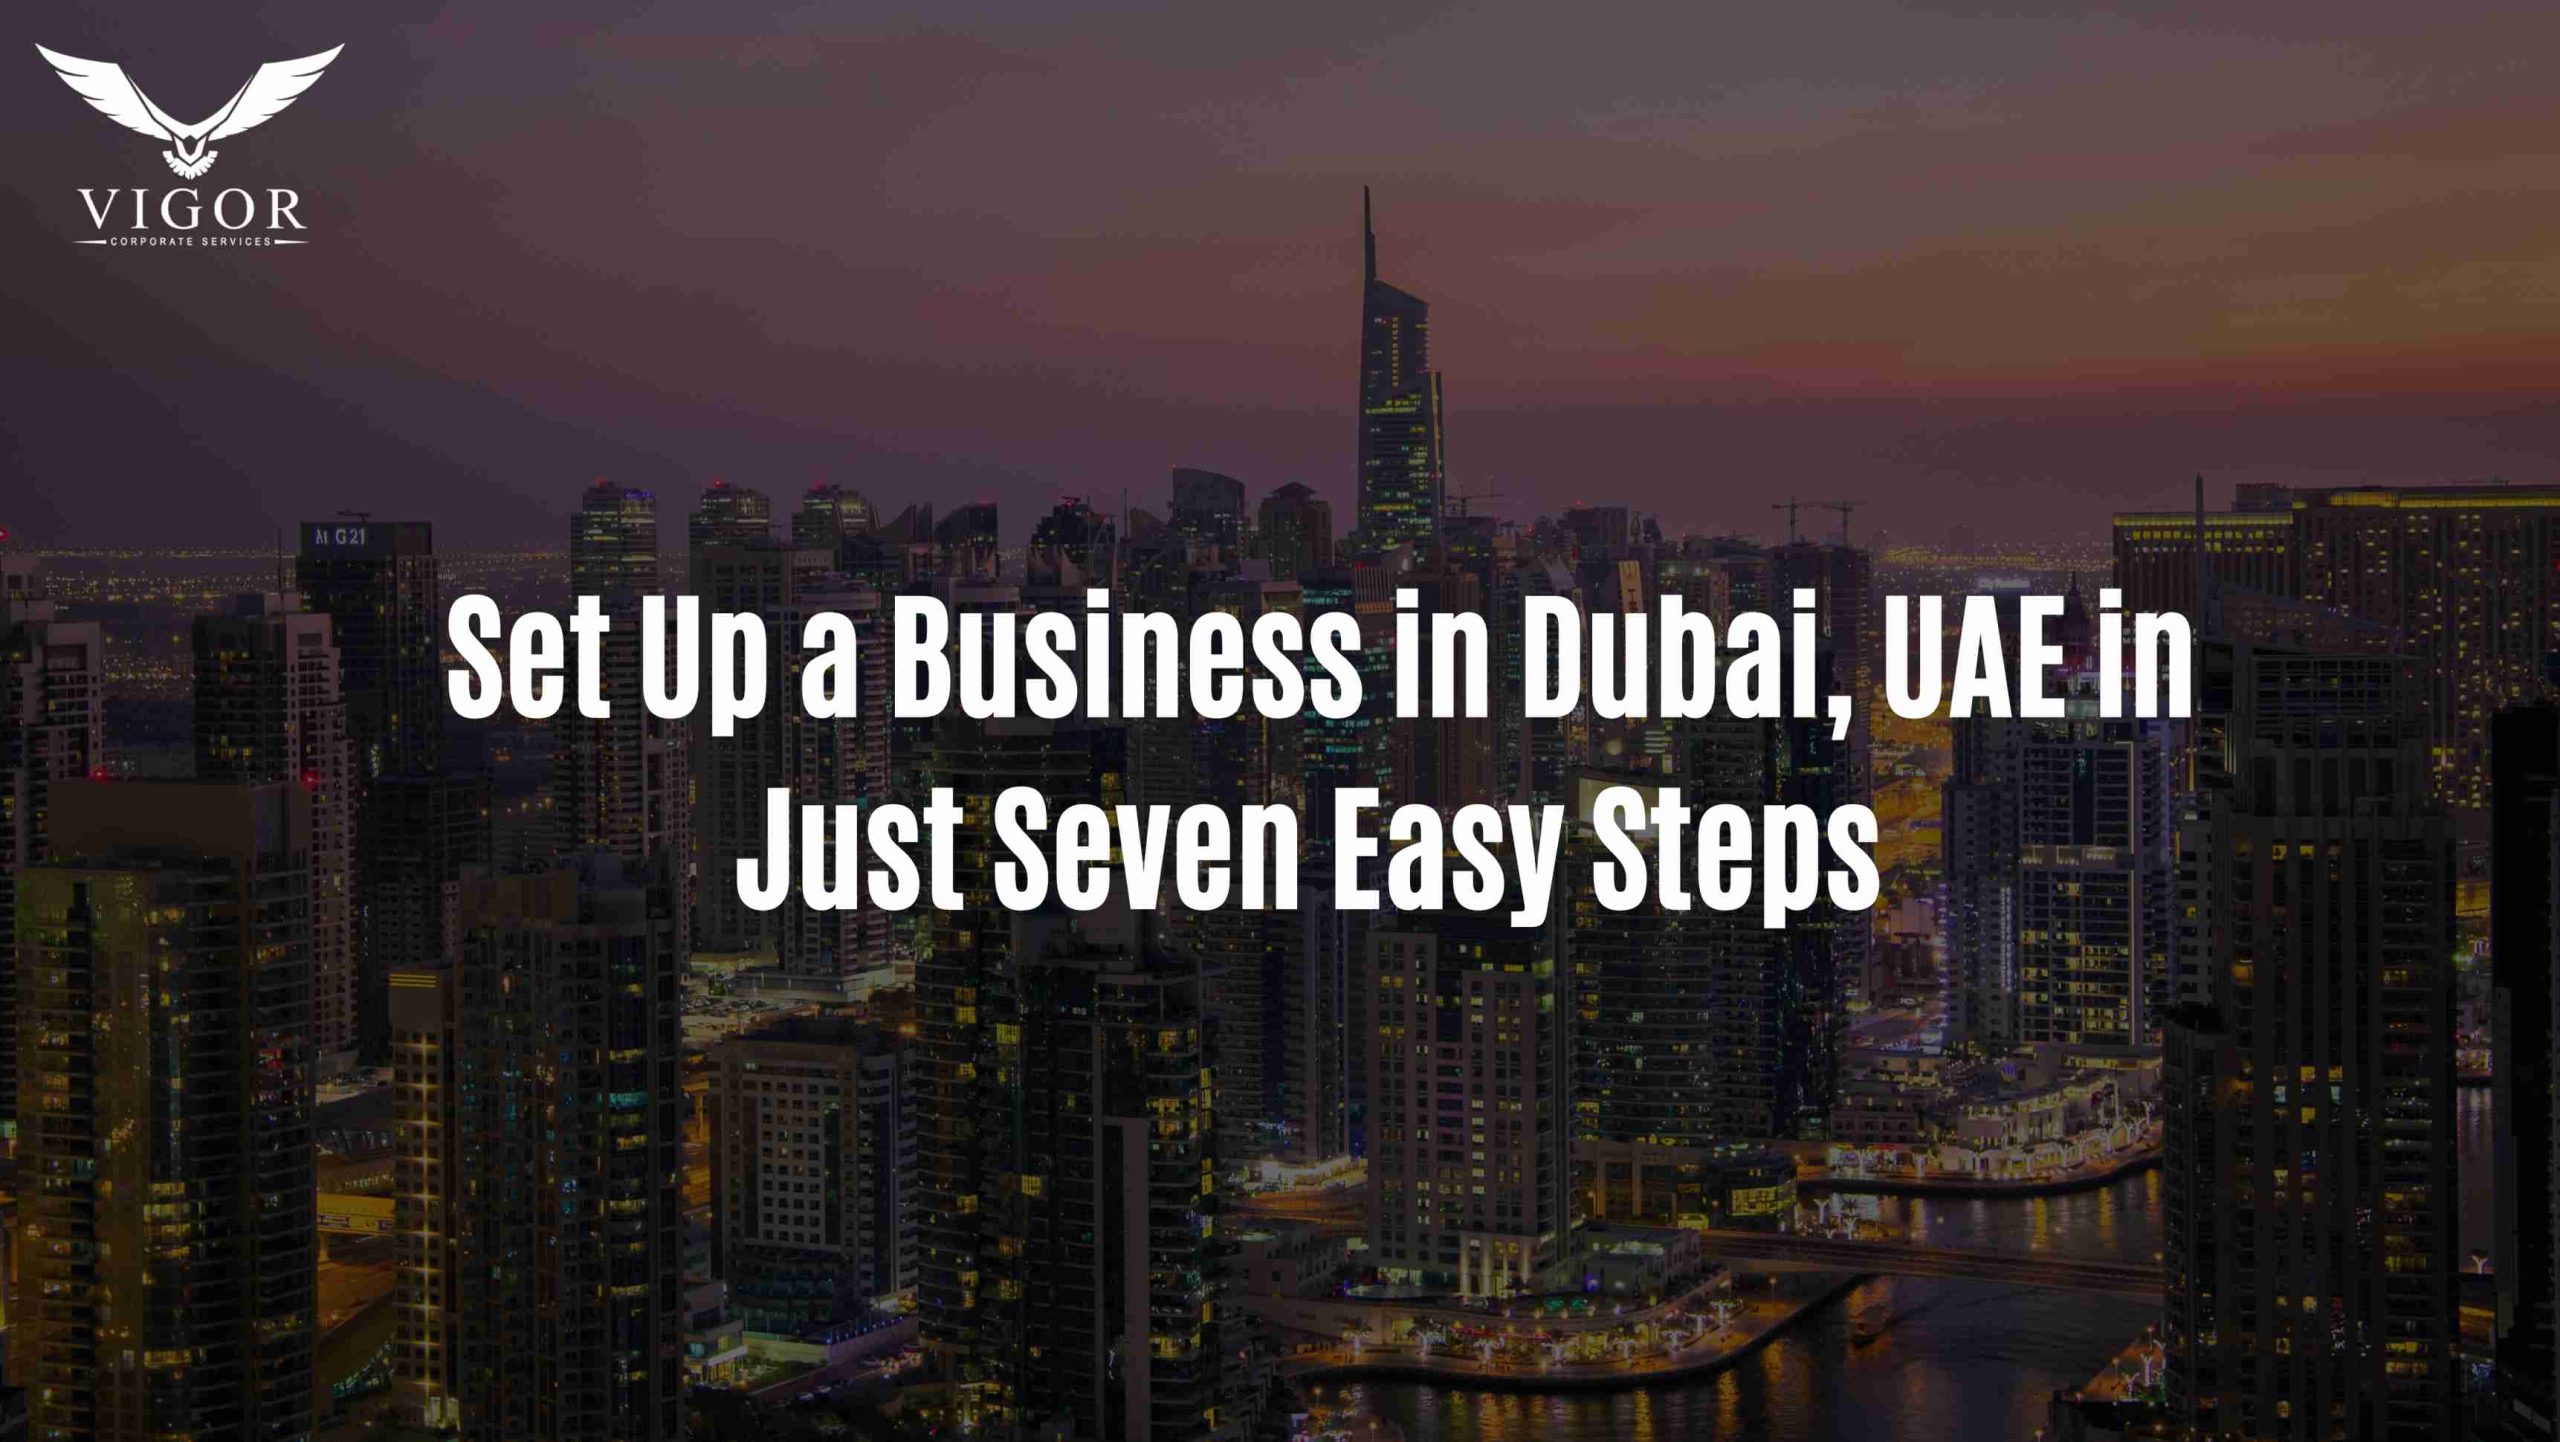 Set Up a Business in Dubai, UAE in Just Seven Easy Steps